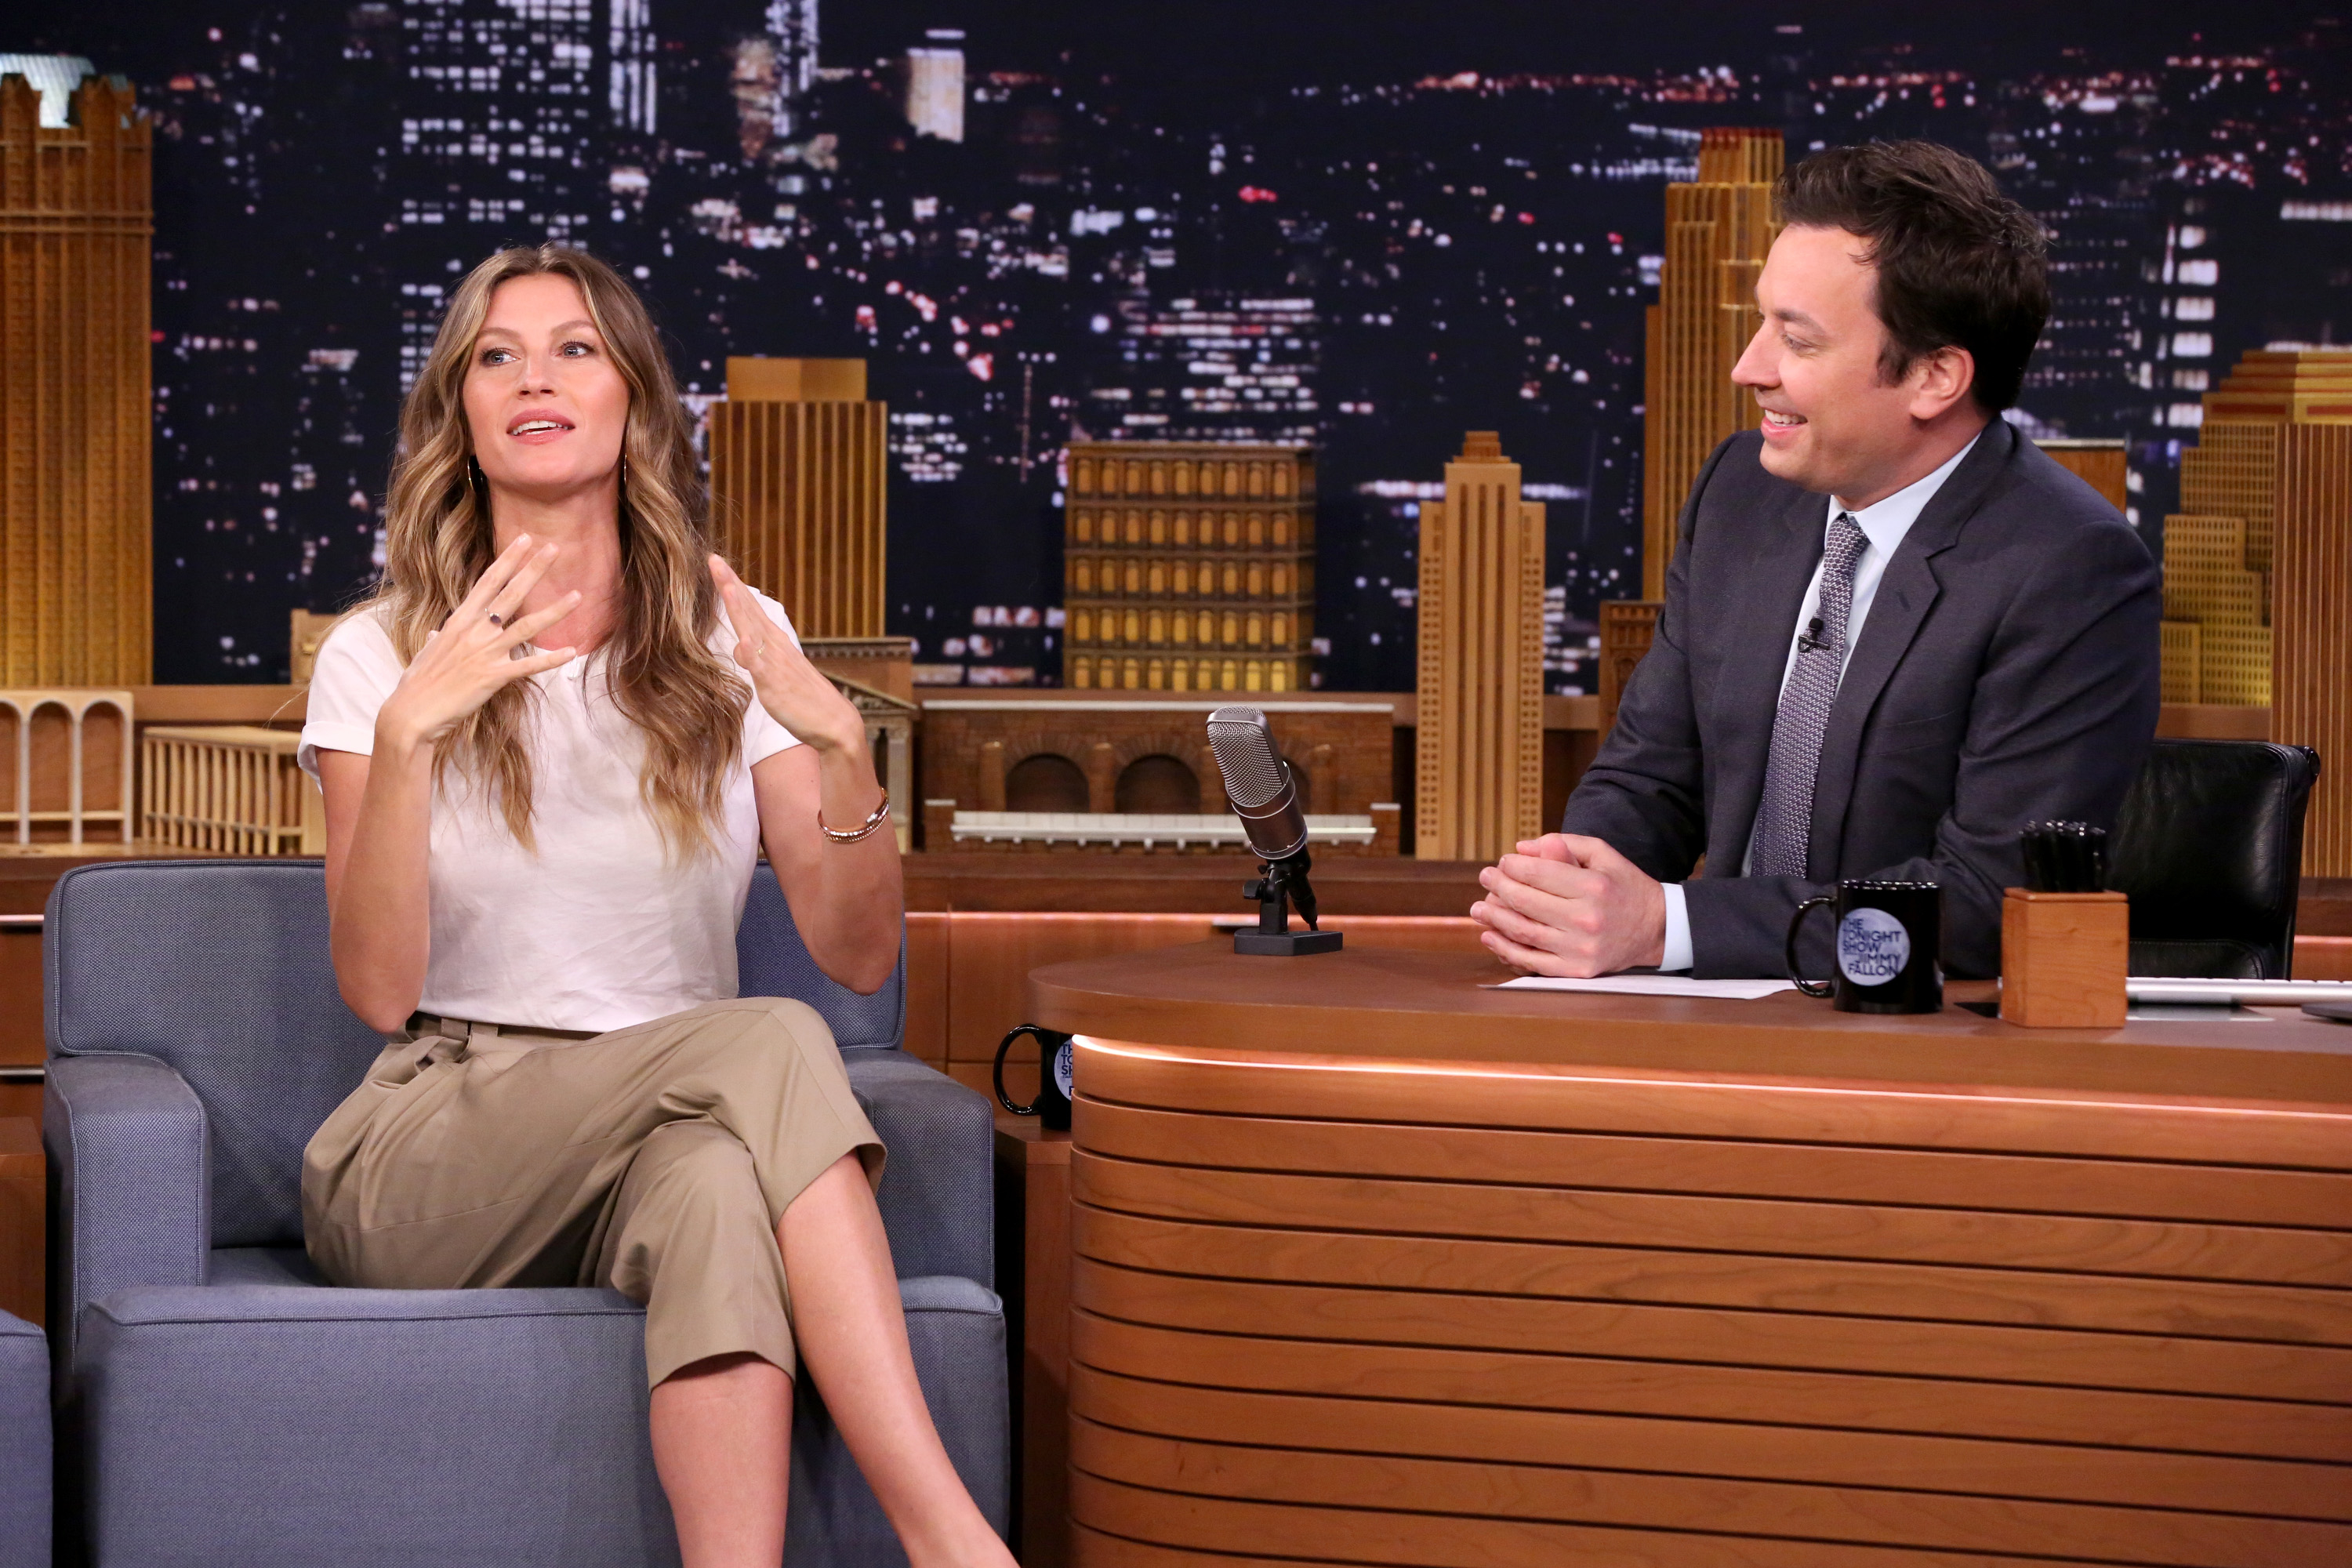 Gisele Bündchen on &quot;The Tonight Show with Jimmy Fallon&quot;